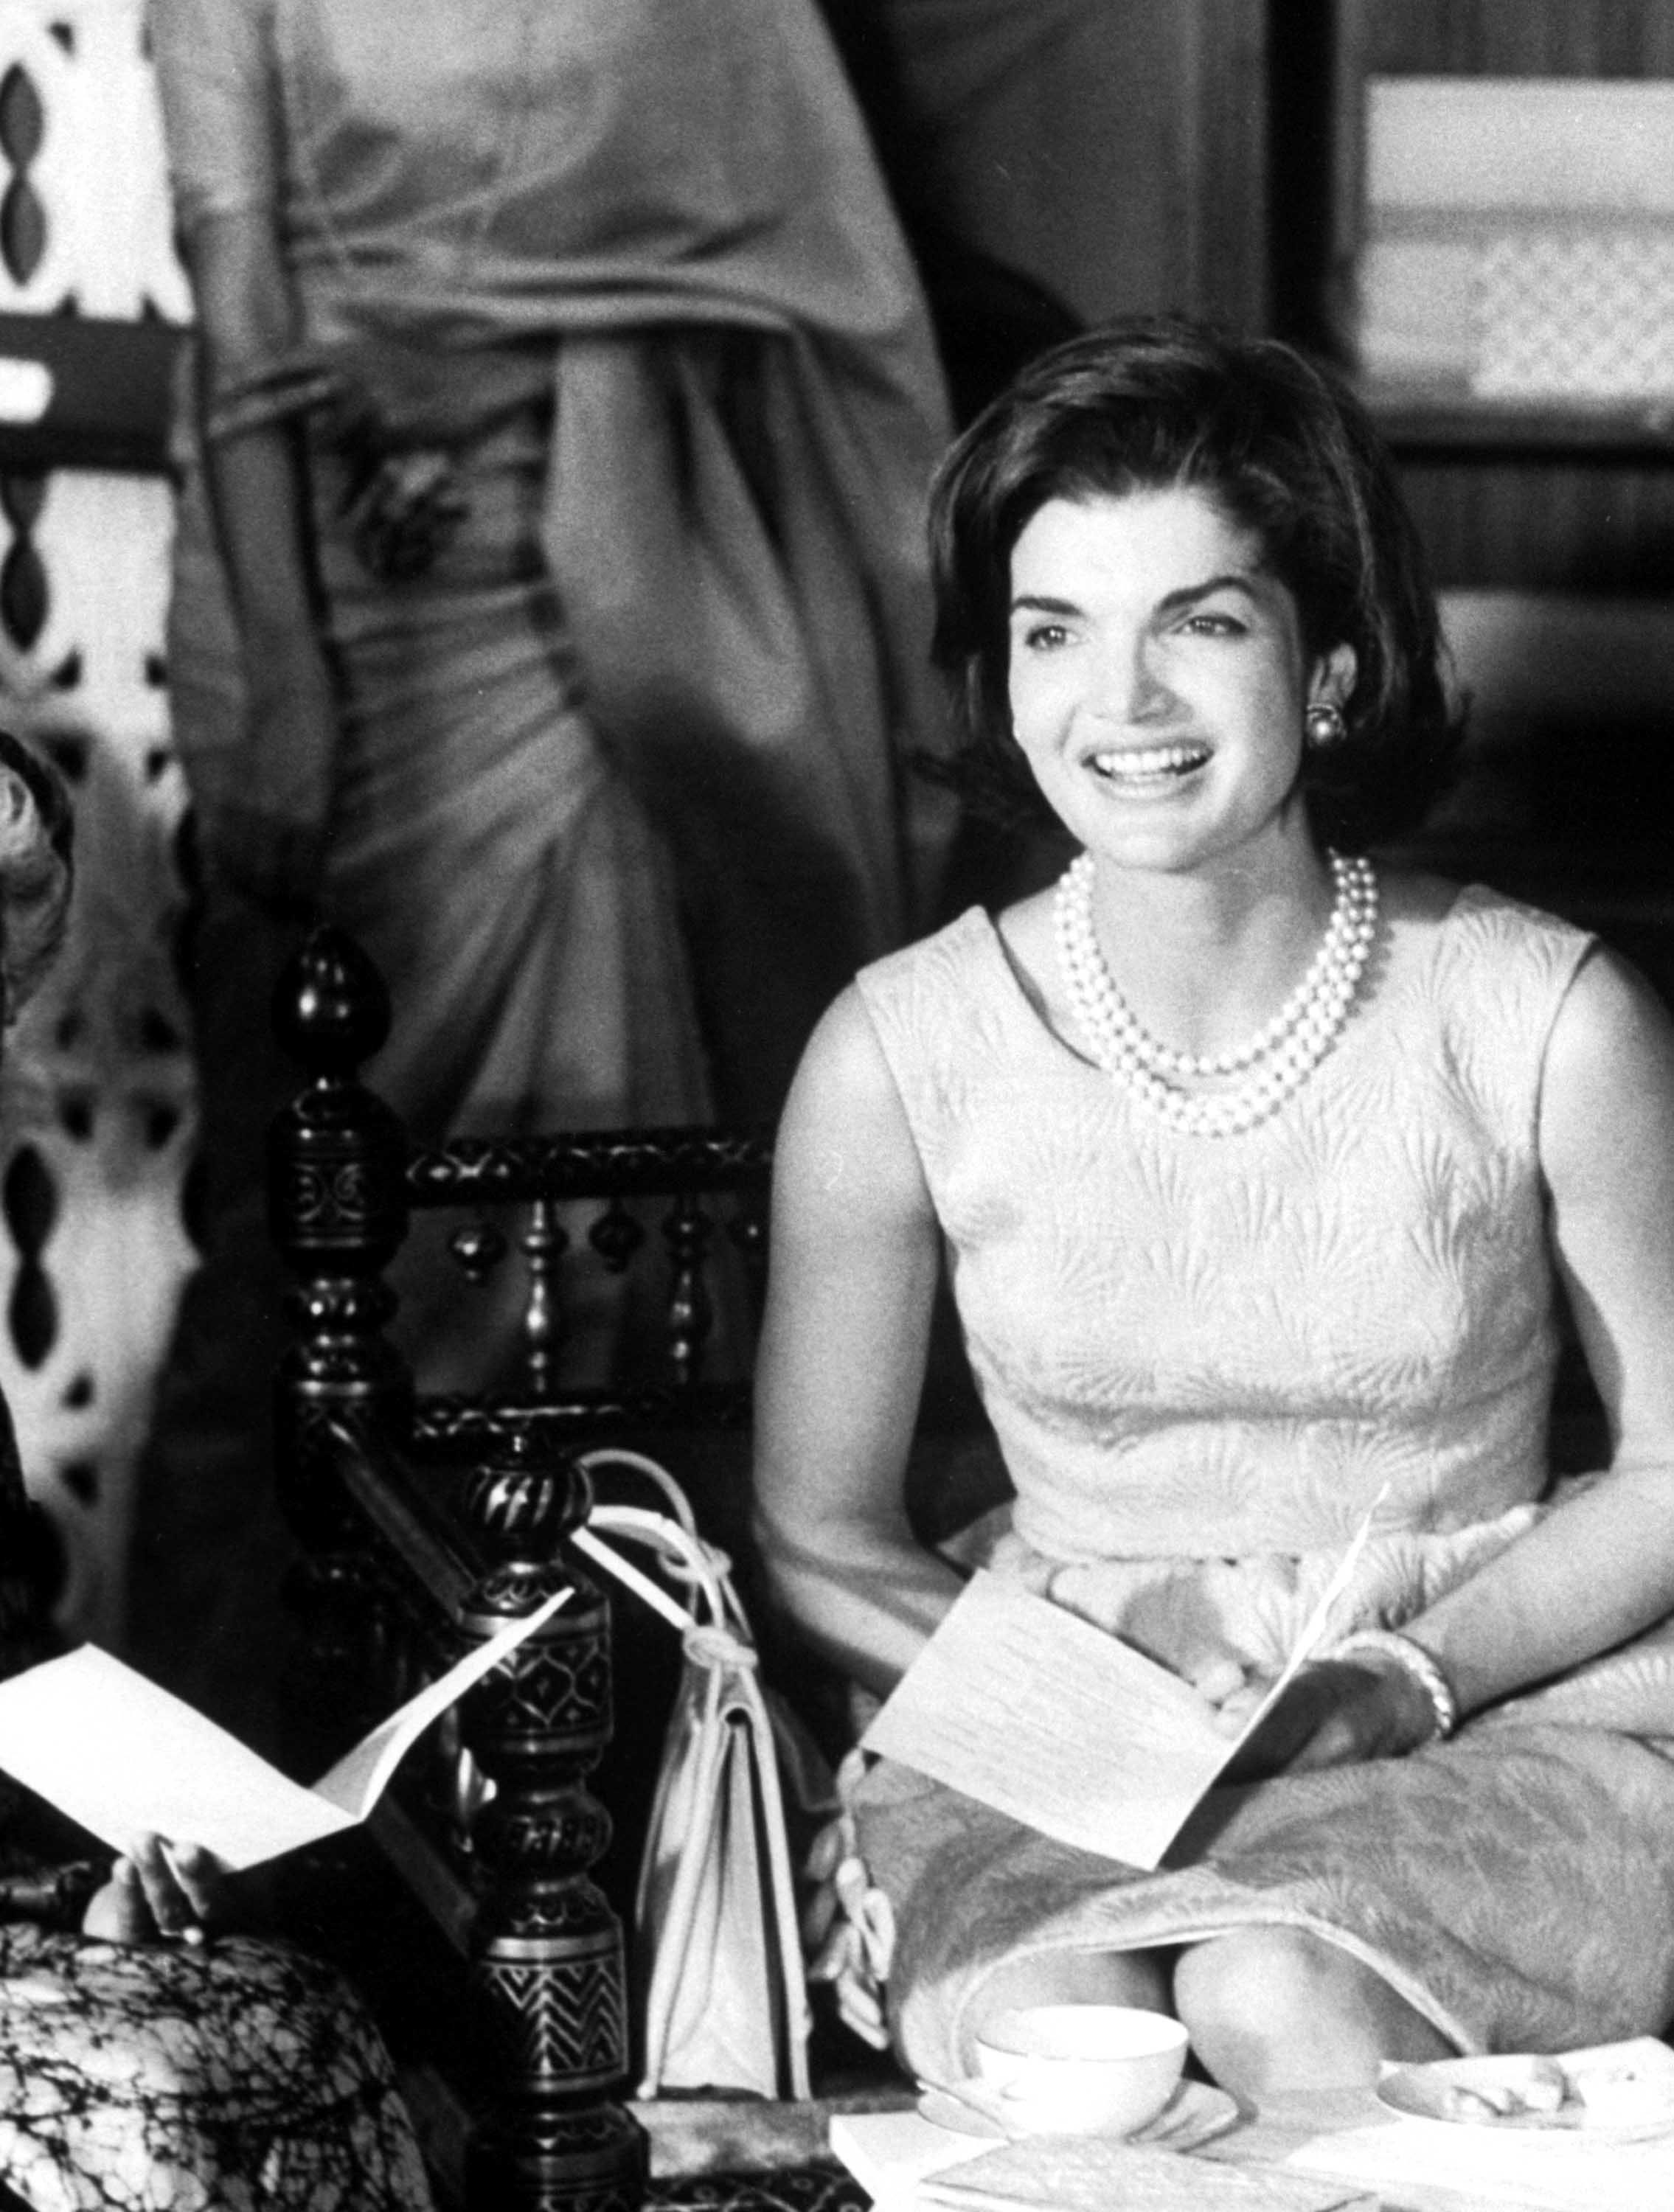 Jackie Kennedy during her visit to India in March 1962.